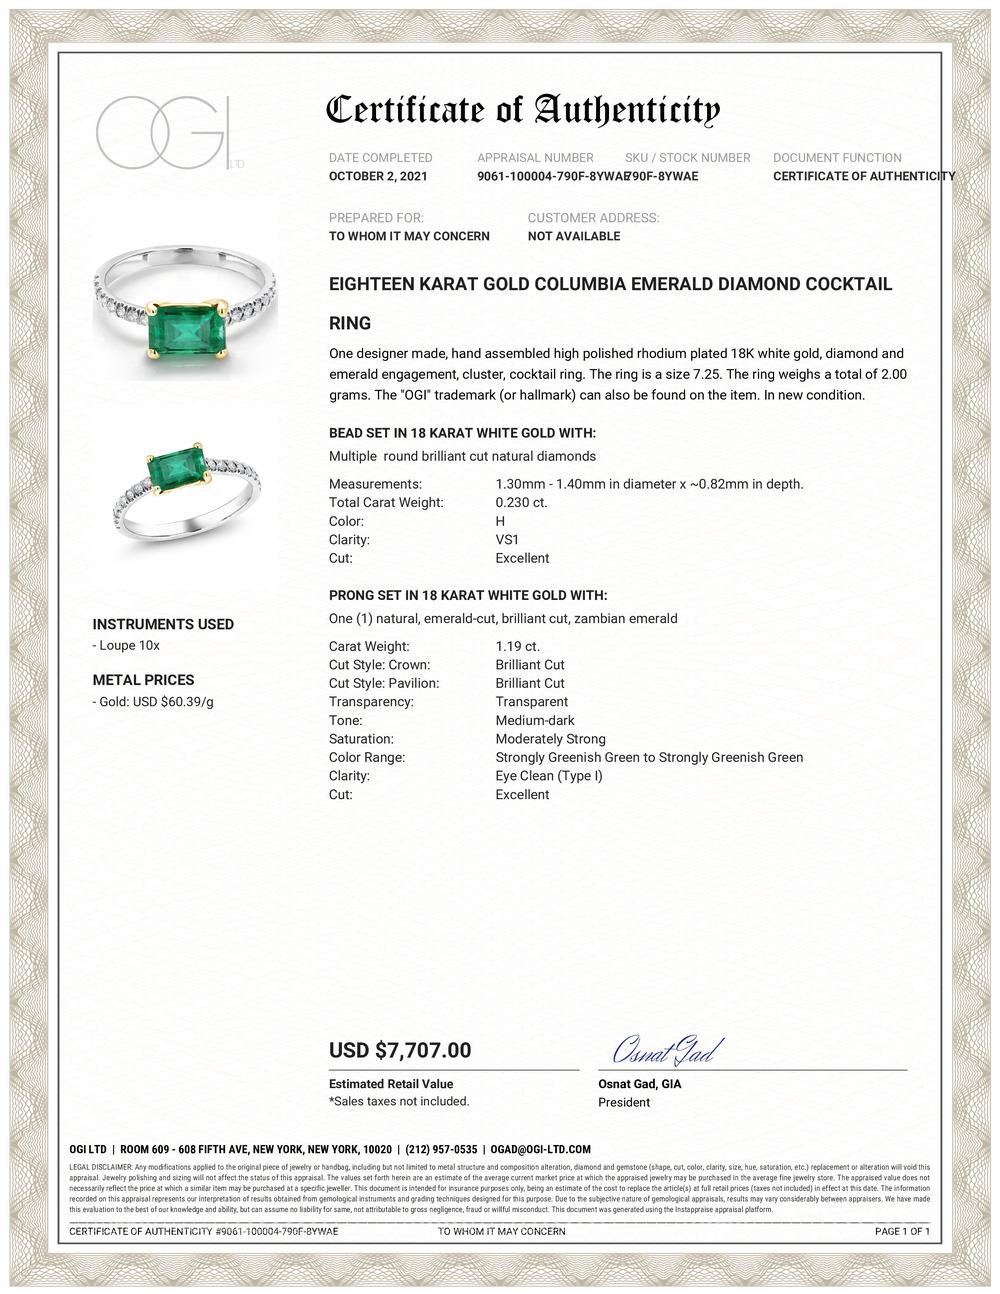 Eighteen karats white and yellow gold emerald and diamond cocktail ring 
Eighteen diamond weighing 0.23 carats
Columbia green emerald cut emerald weighing 1.19 carats
Emerald hue tone color is of grass green 
Ring finger size 7.25
Emerald measuring